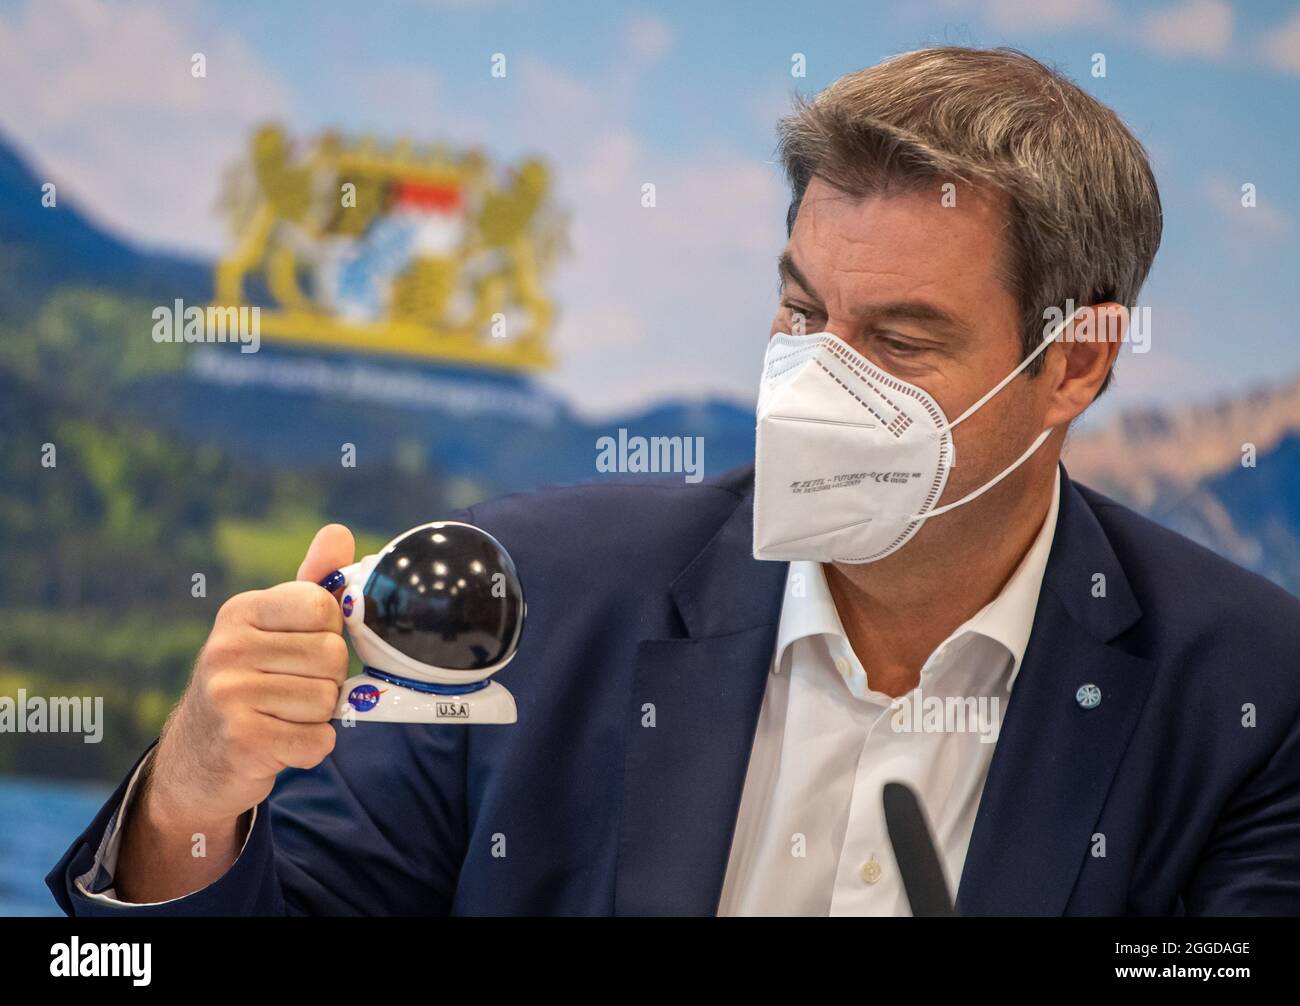 Munich, Germany. 31st Aug, 2021. Markus Söder (CSU), Prime Minister of Bavaria, looks at a new mug in the shape of an astronaut's helmet at the beginning of the first meeting of the Bavarian cabinet after the summer break. Among other things, the Council of Ministers wants to pass the new Corona Ordinance, which no longer makes requirements dependent on incidence alone and provides for the end of the FFP-2 mask requirement. Credit: Peter Kneffel/dpa/Alamy Live News Stock Photo